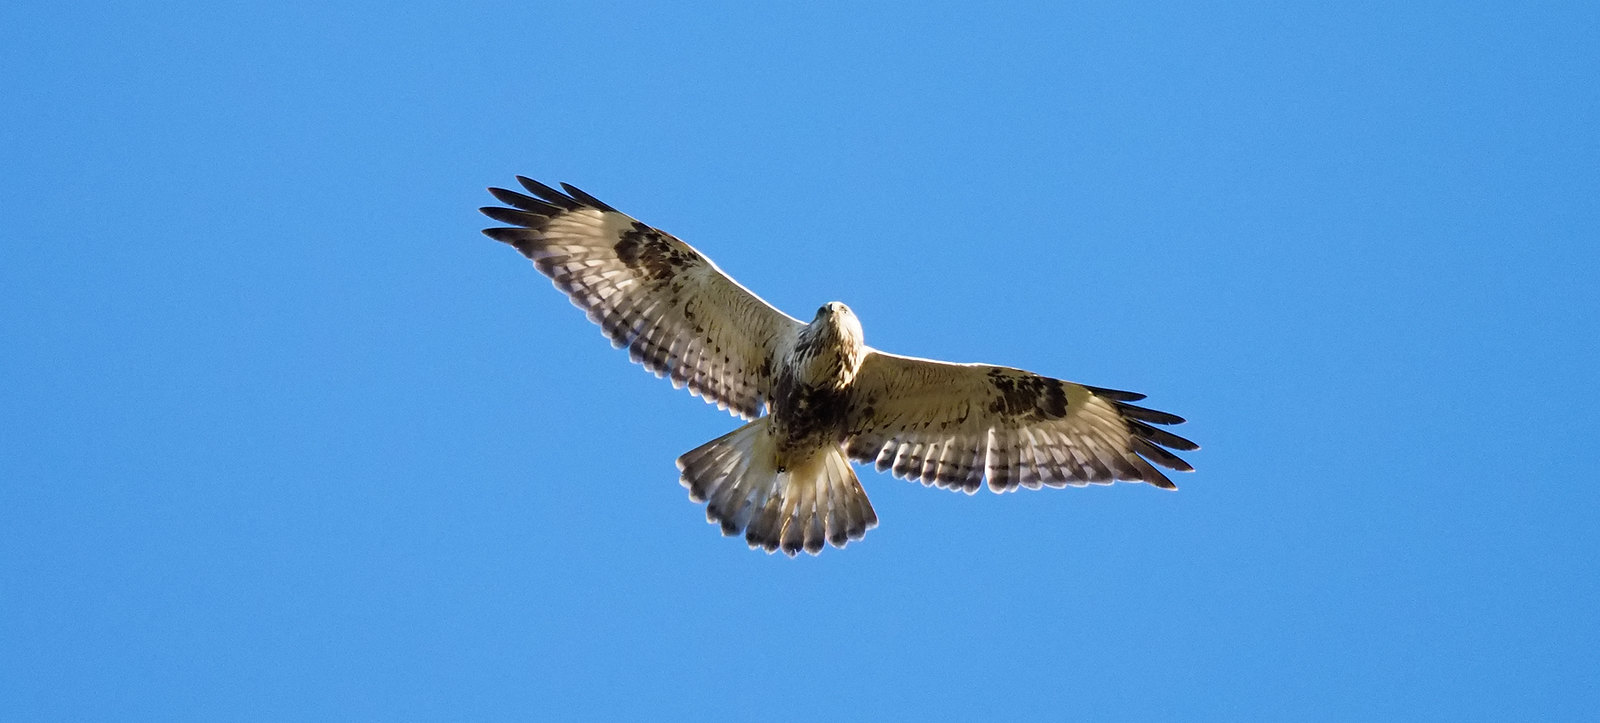 Rough-legged Buzzard - not epic but shows underwing pattern and tail